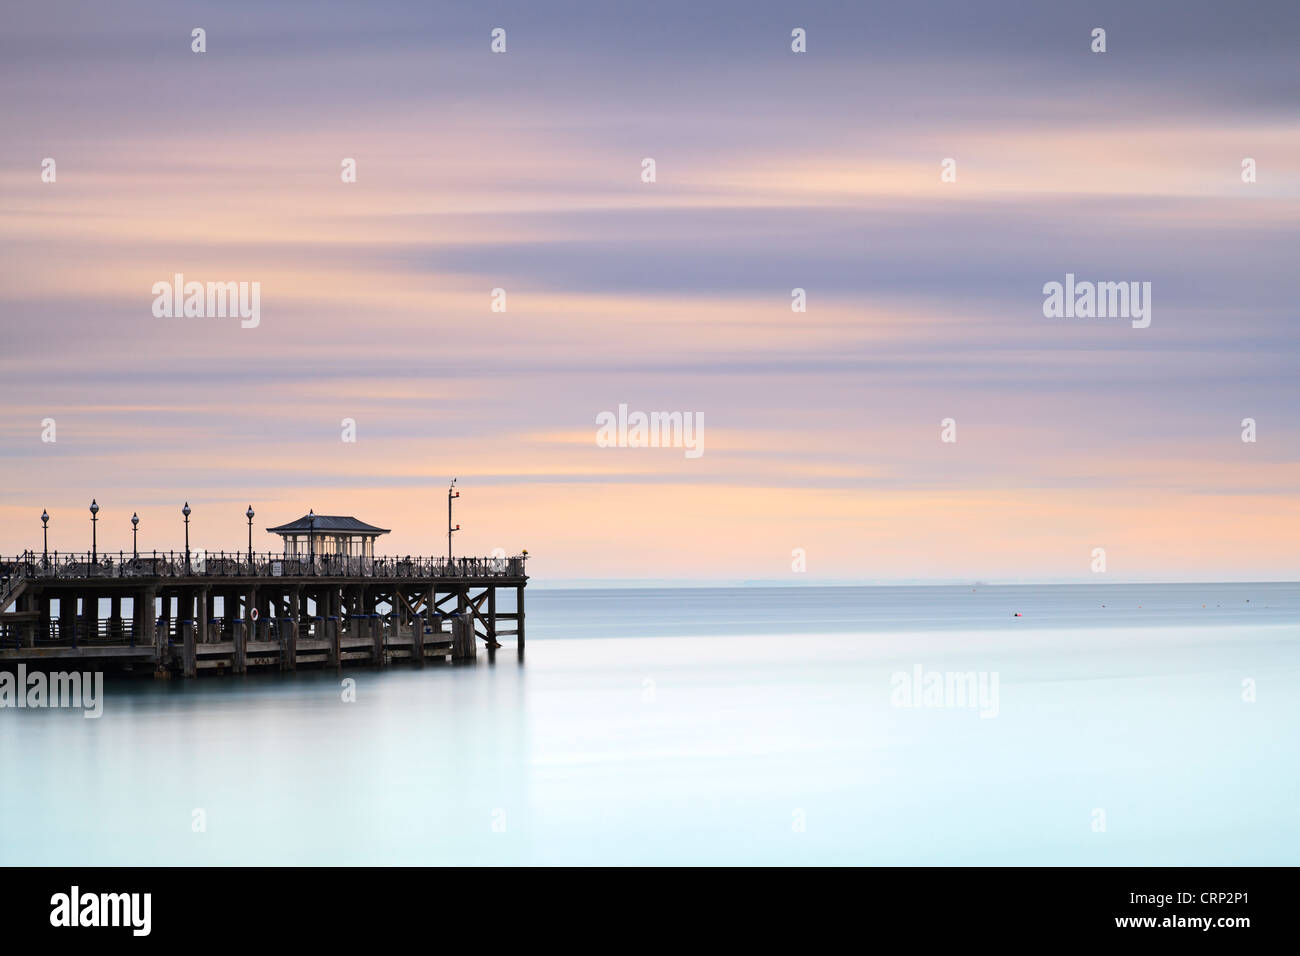 The Victorian pier at Swanage, jutting out into the sea, in early morning light. Stock Photo